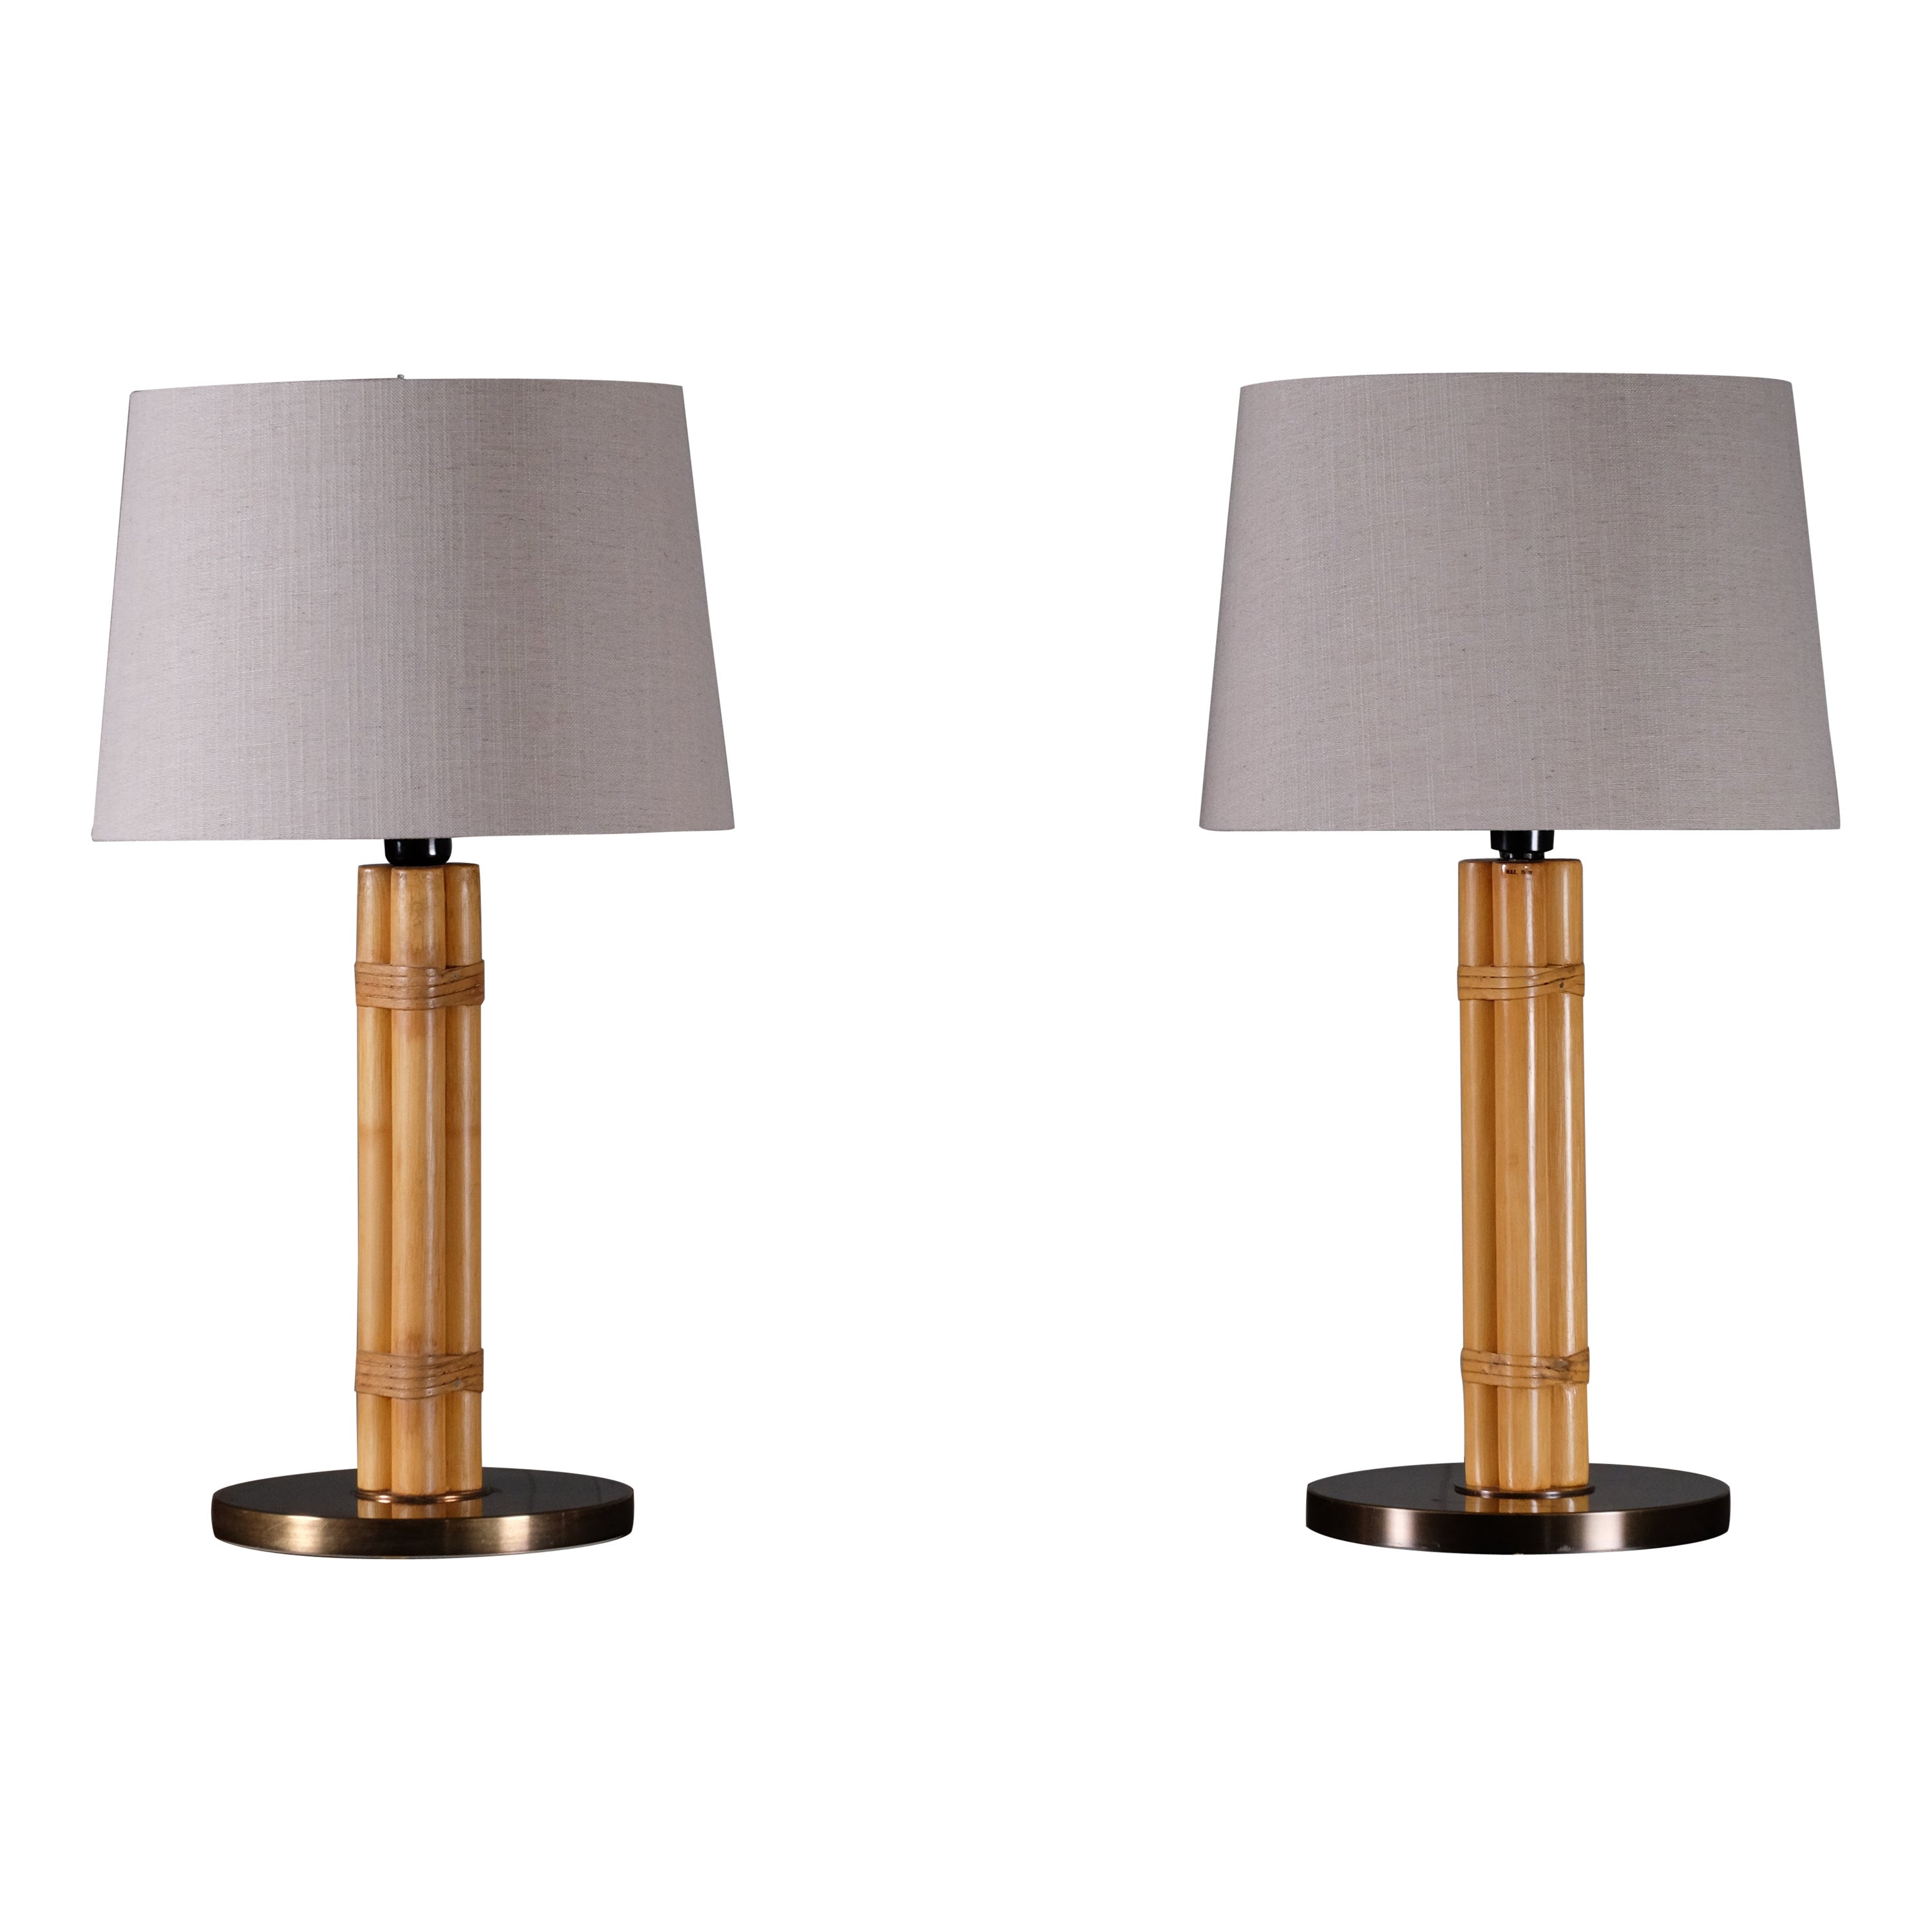 Pair of Hans-Agne Jakobsson Brass & Bamboo Table Lamps, 1970s For Sale